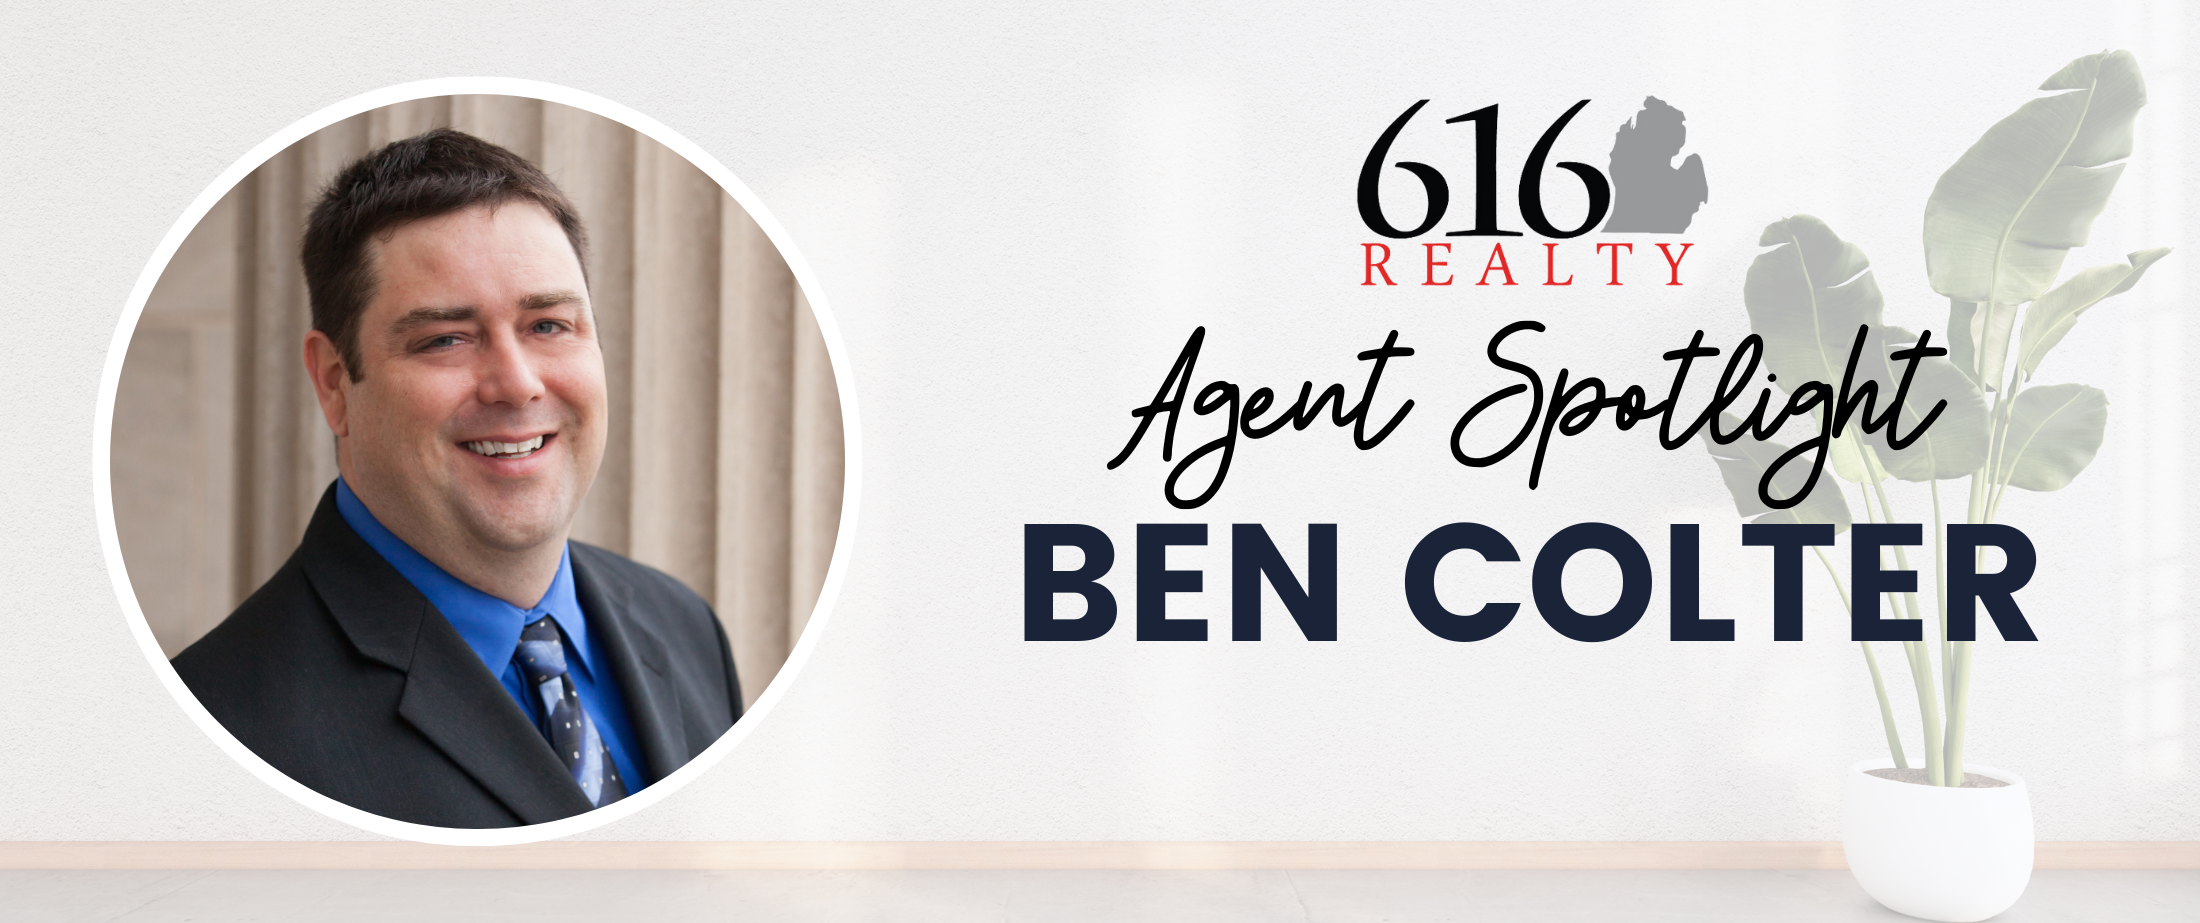 Ben Colter -- Featured Agent